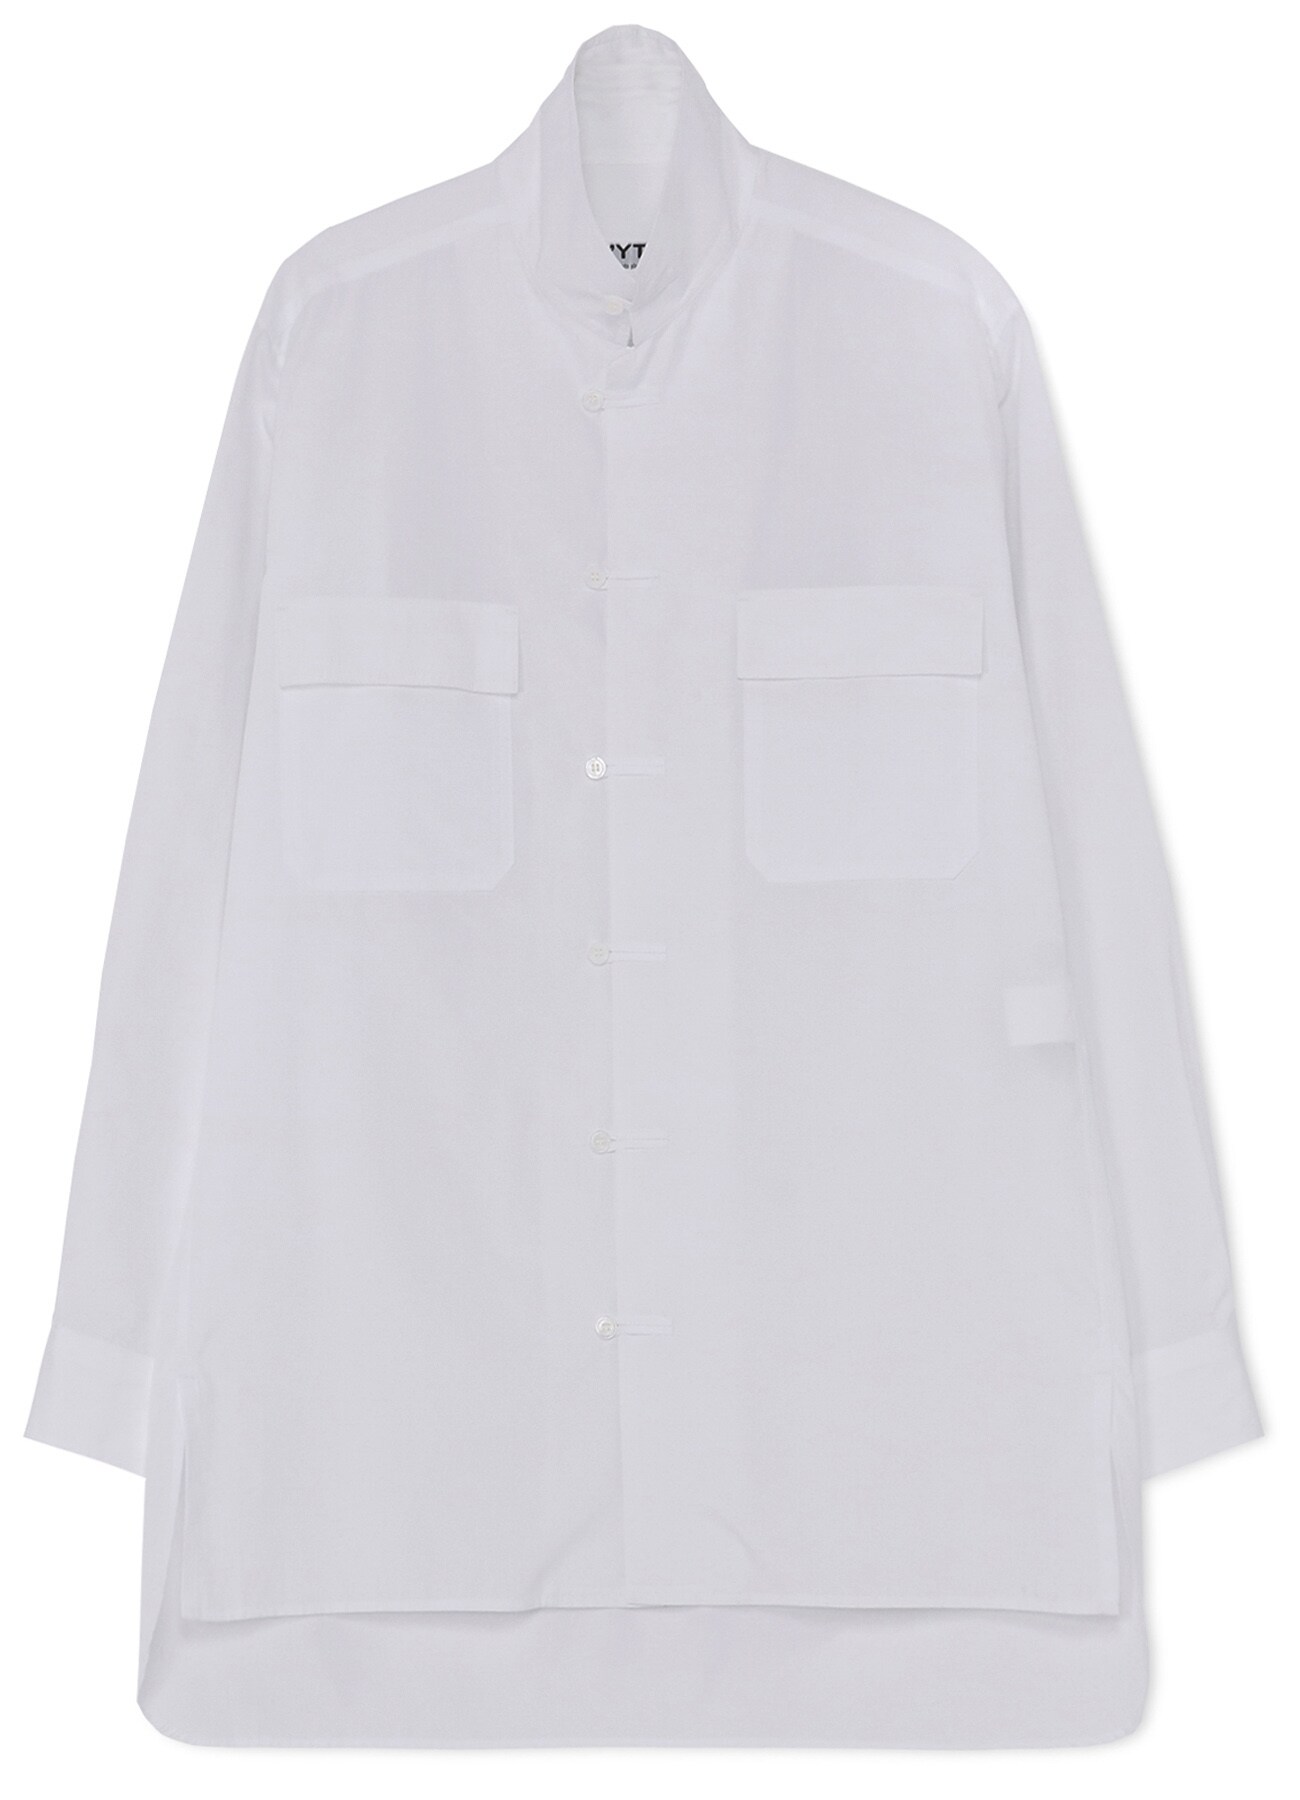 100/2 Broad Sleeve Tie Open Collar Shirt (M White): S'YTE | THE 